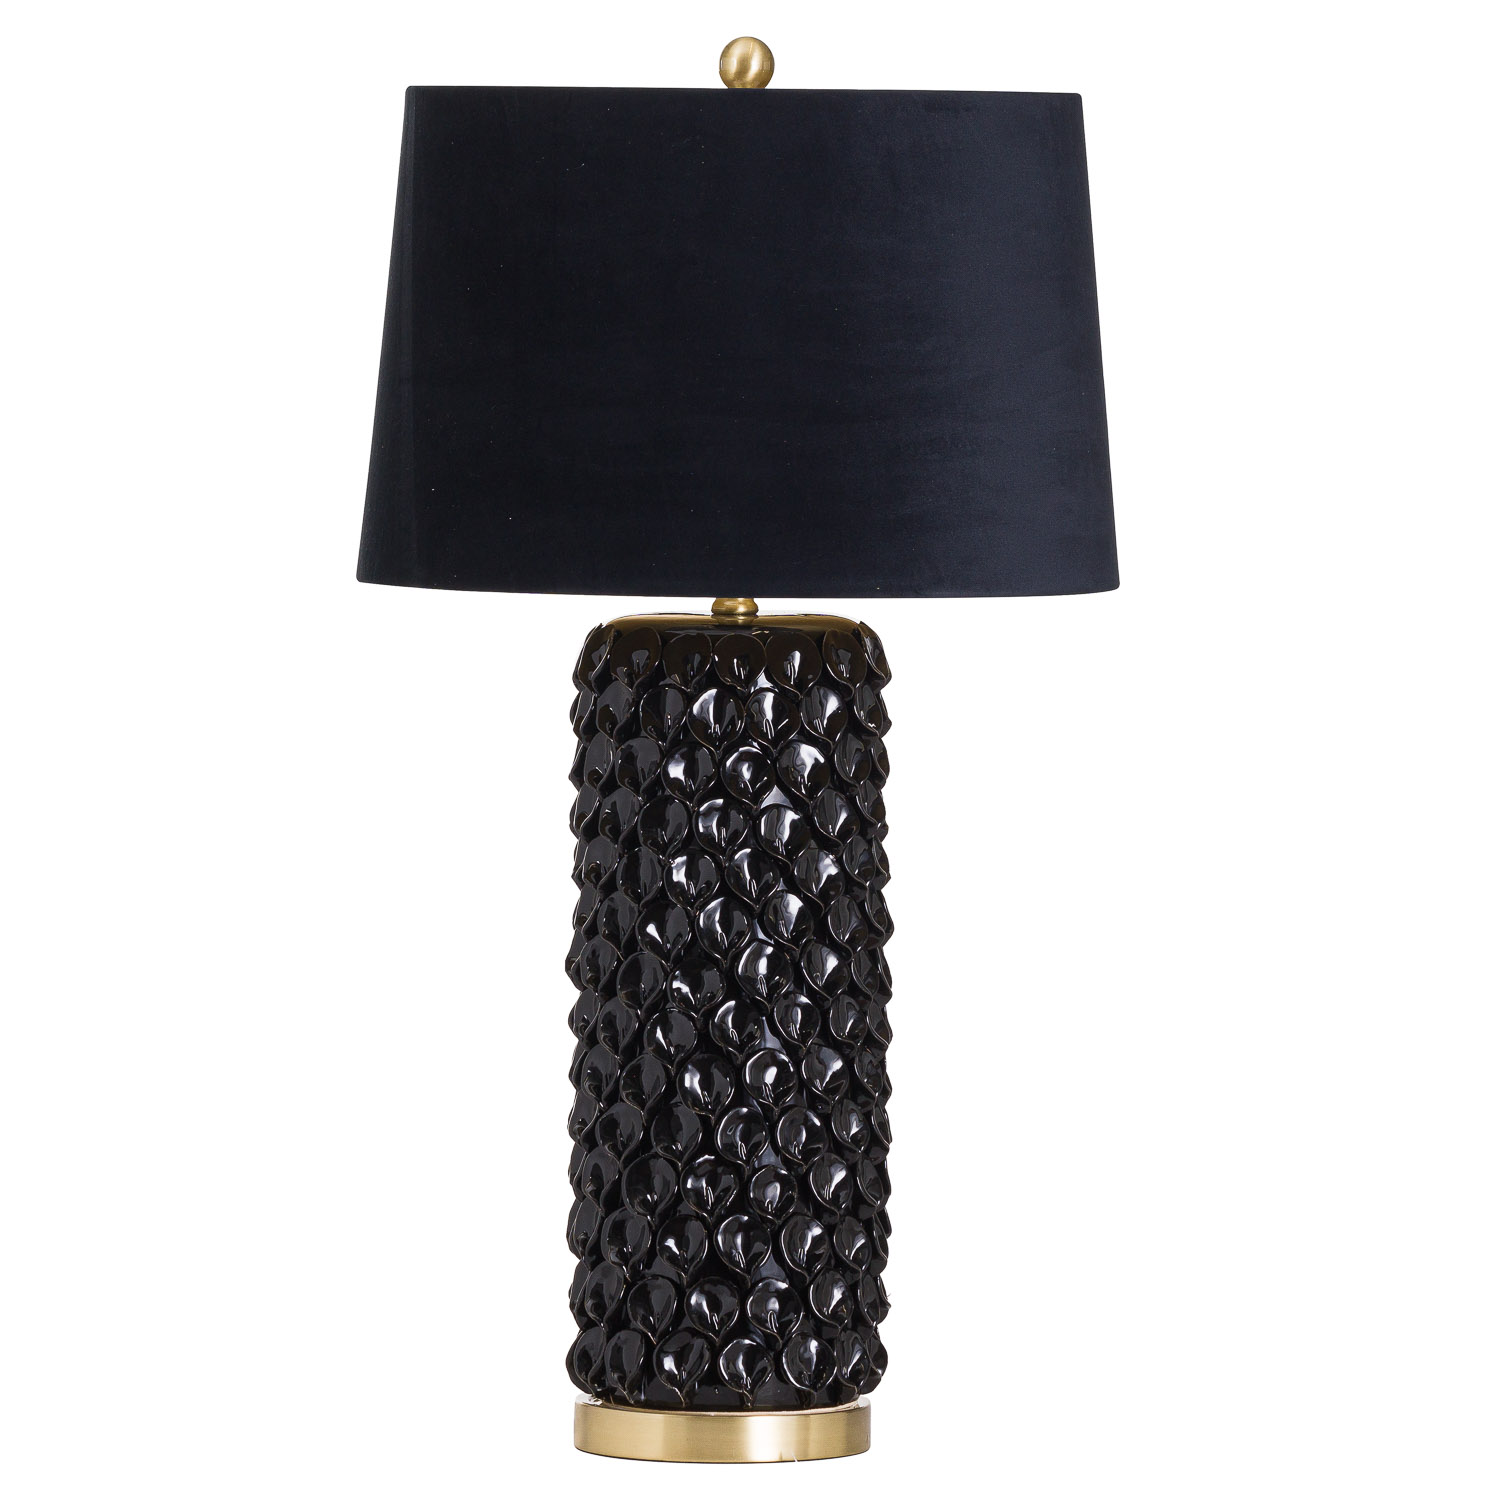 Barbro Table Lamp With Black Velvet Shade - Image 1